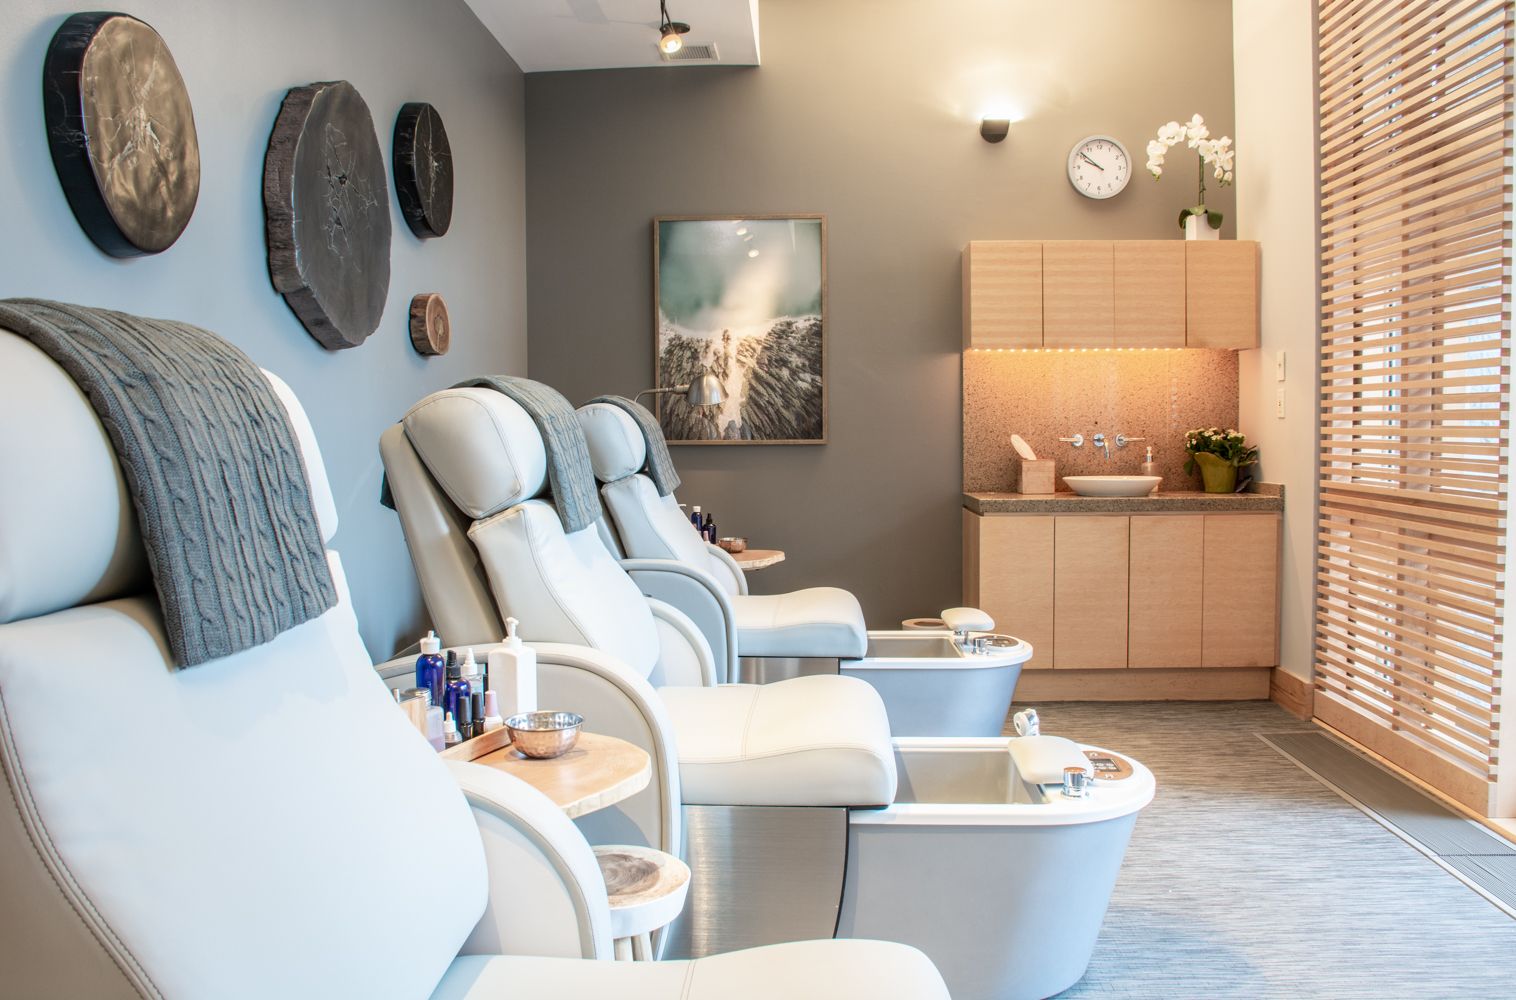 Pedicure treatment chairs in a row